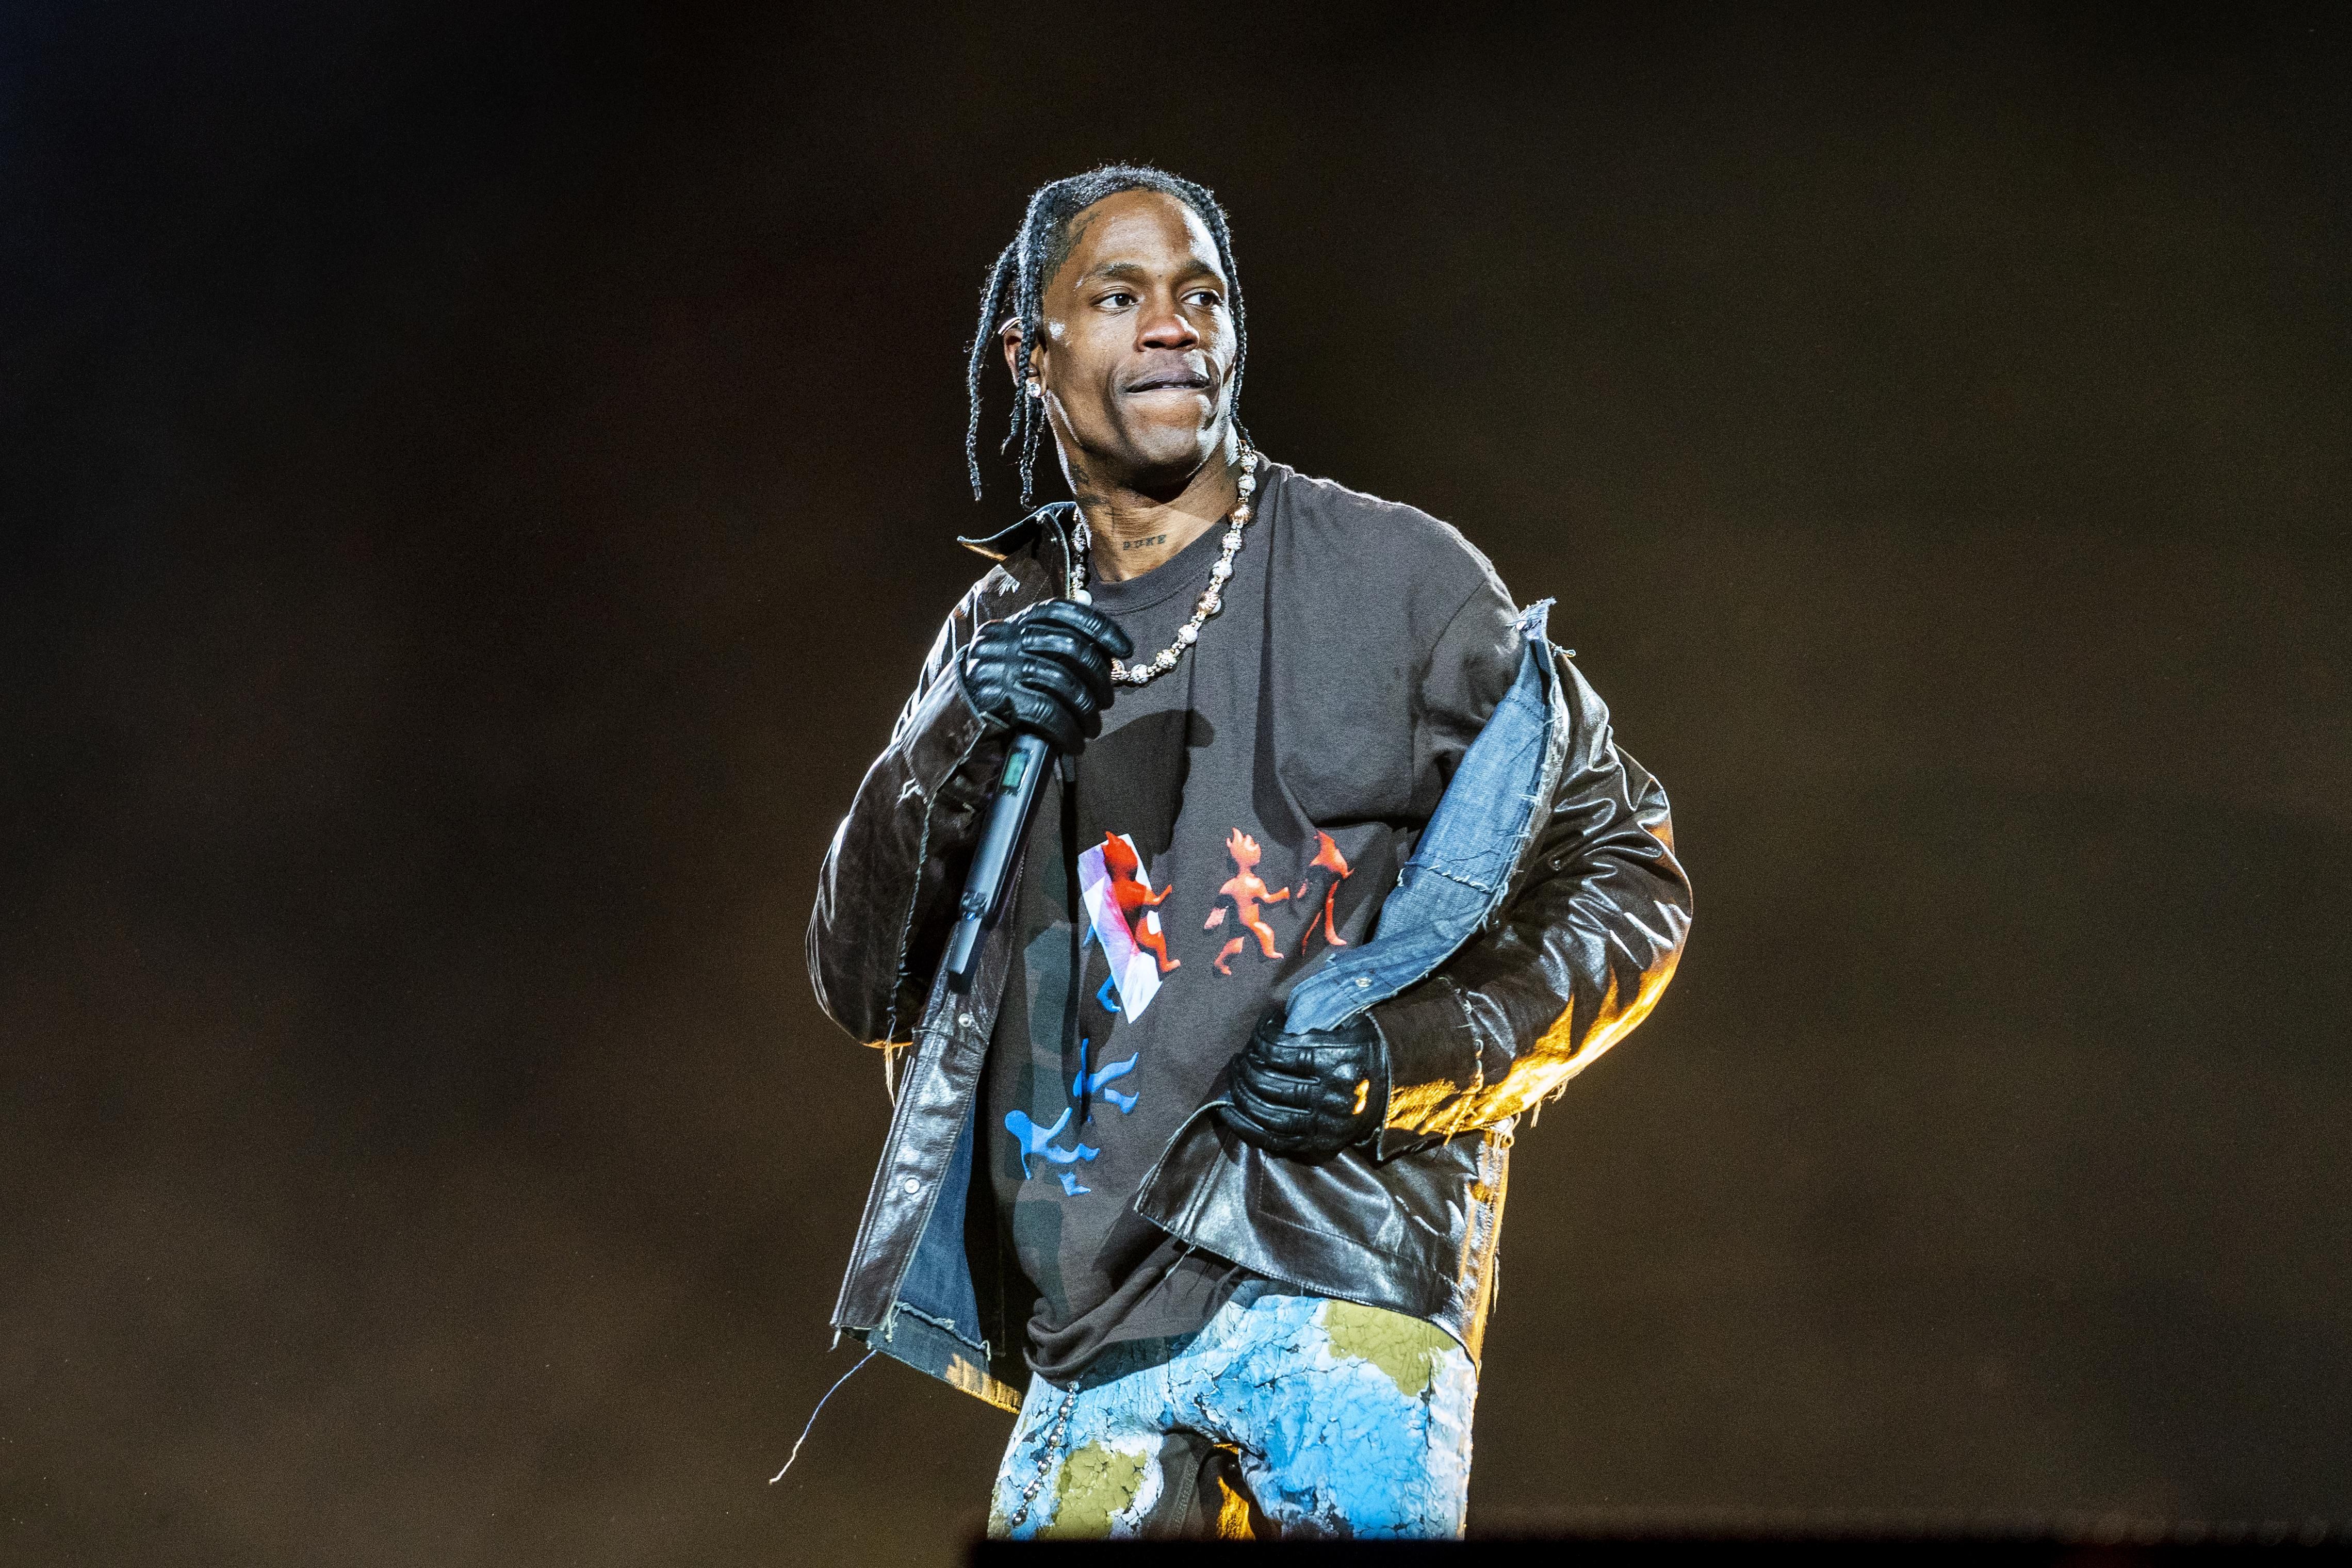 Travis Scott Reportedly Pulled From Coachella 2022 Lineup - PAPER